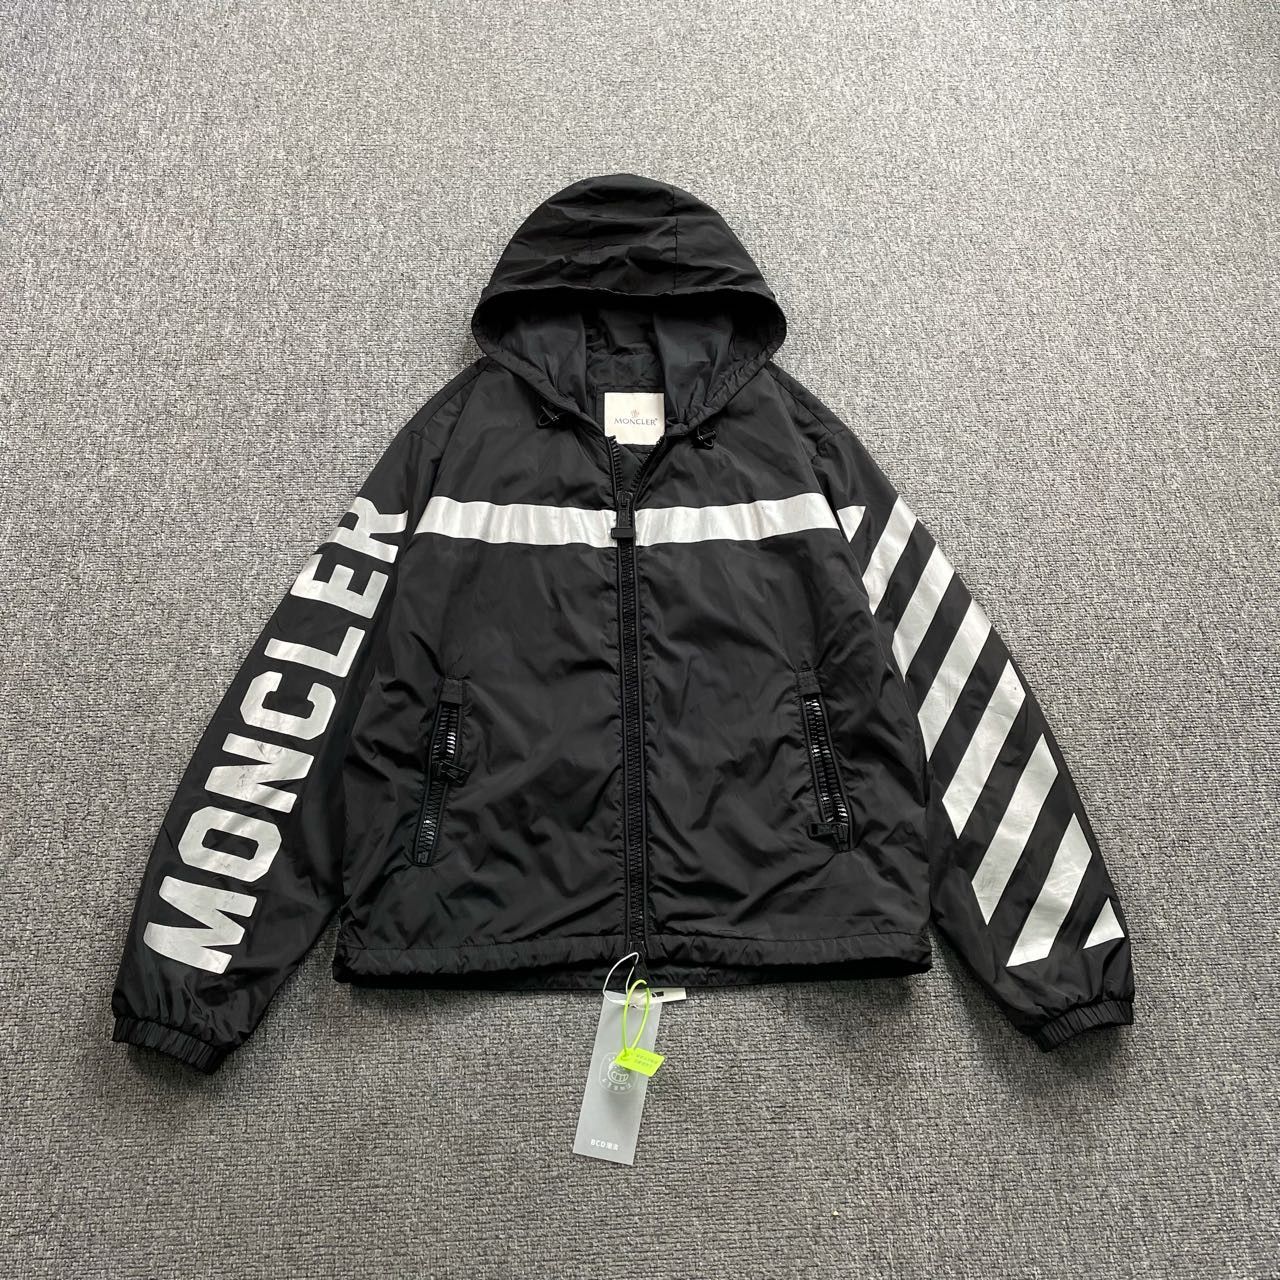 Moncler x Off-white 3M Reflective Zip-up Hoodie Light Jacket - 1